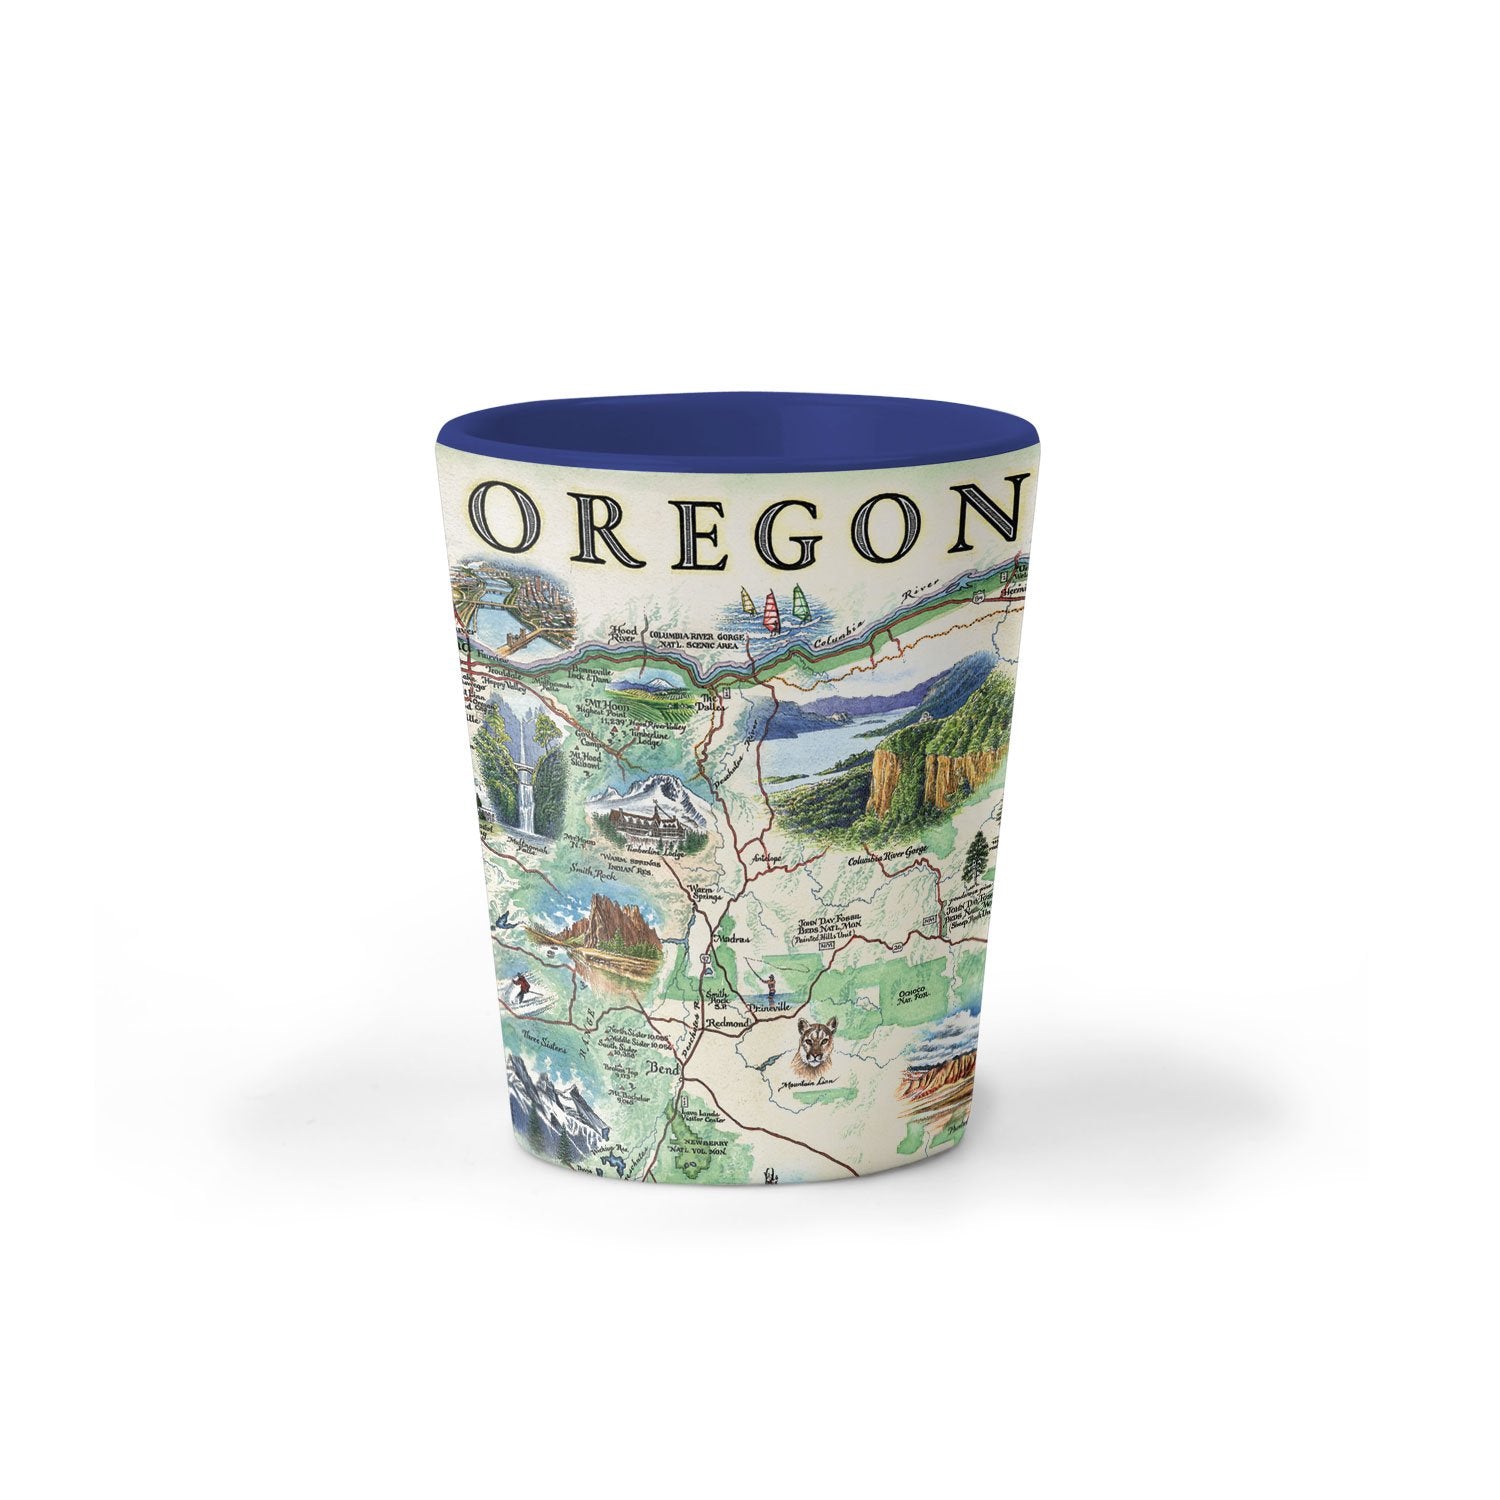 Oregon Map Ceramic shot glass by Xplorer Maps. The map features illustrations such as Hells Canyon Snake River, the Columbia River Gorge, Multnomah Falls, and Crater Lake. Flora and fauna include blue whales, big horn sheep, Dungeness crab, Oregon grape, and Douglas Fir. Some cities depicted are Portland, Hood River, Cannon Beach, and Seaside. 